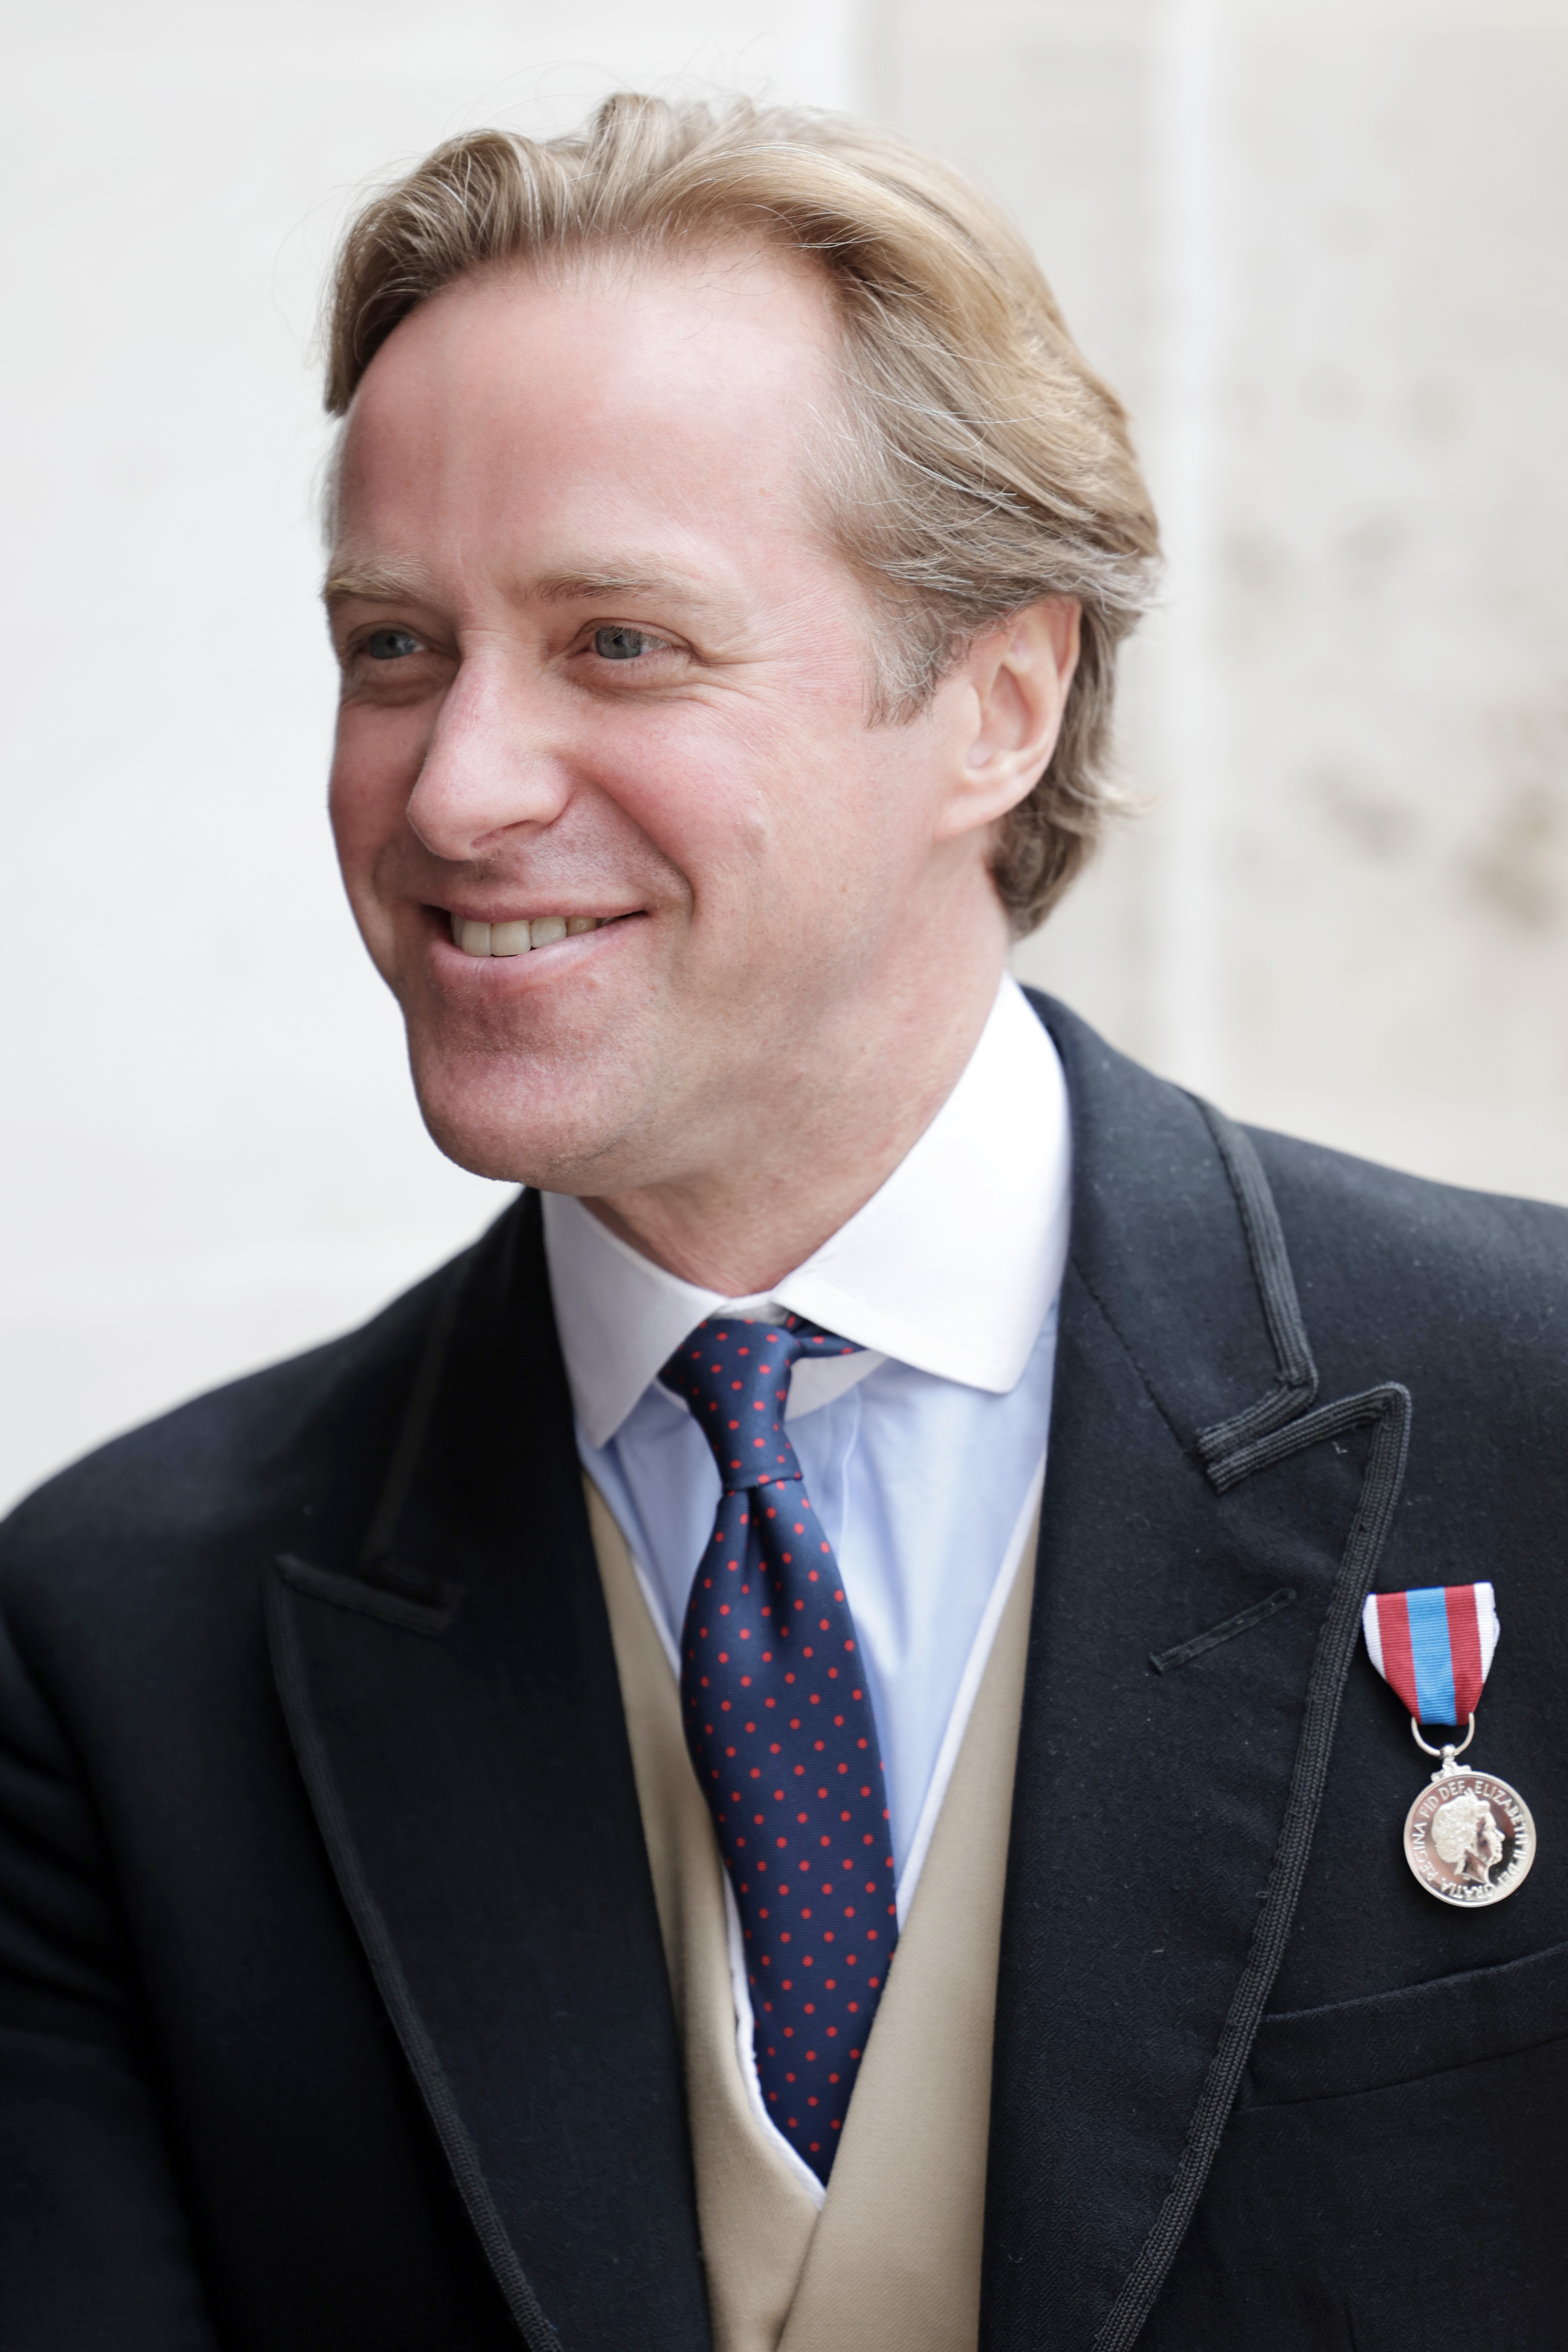 Thomas Kingston at the National Service of Thanksgiving in London, England on June 3, 2022 | Source: Getty Images